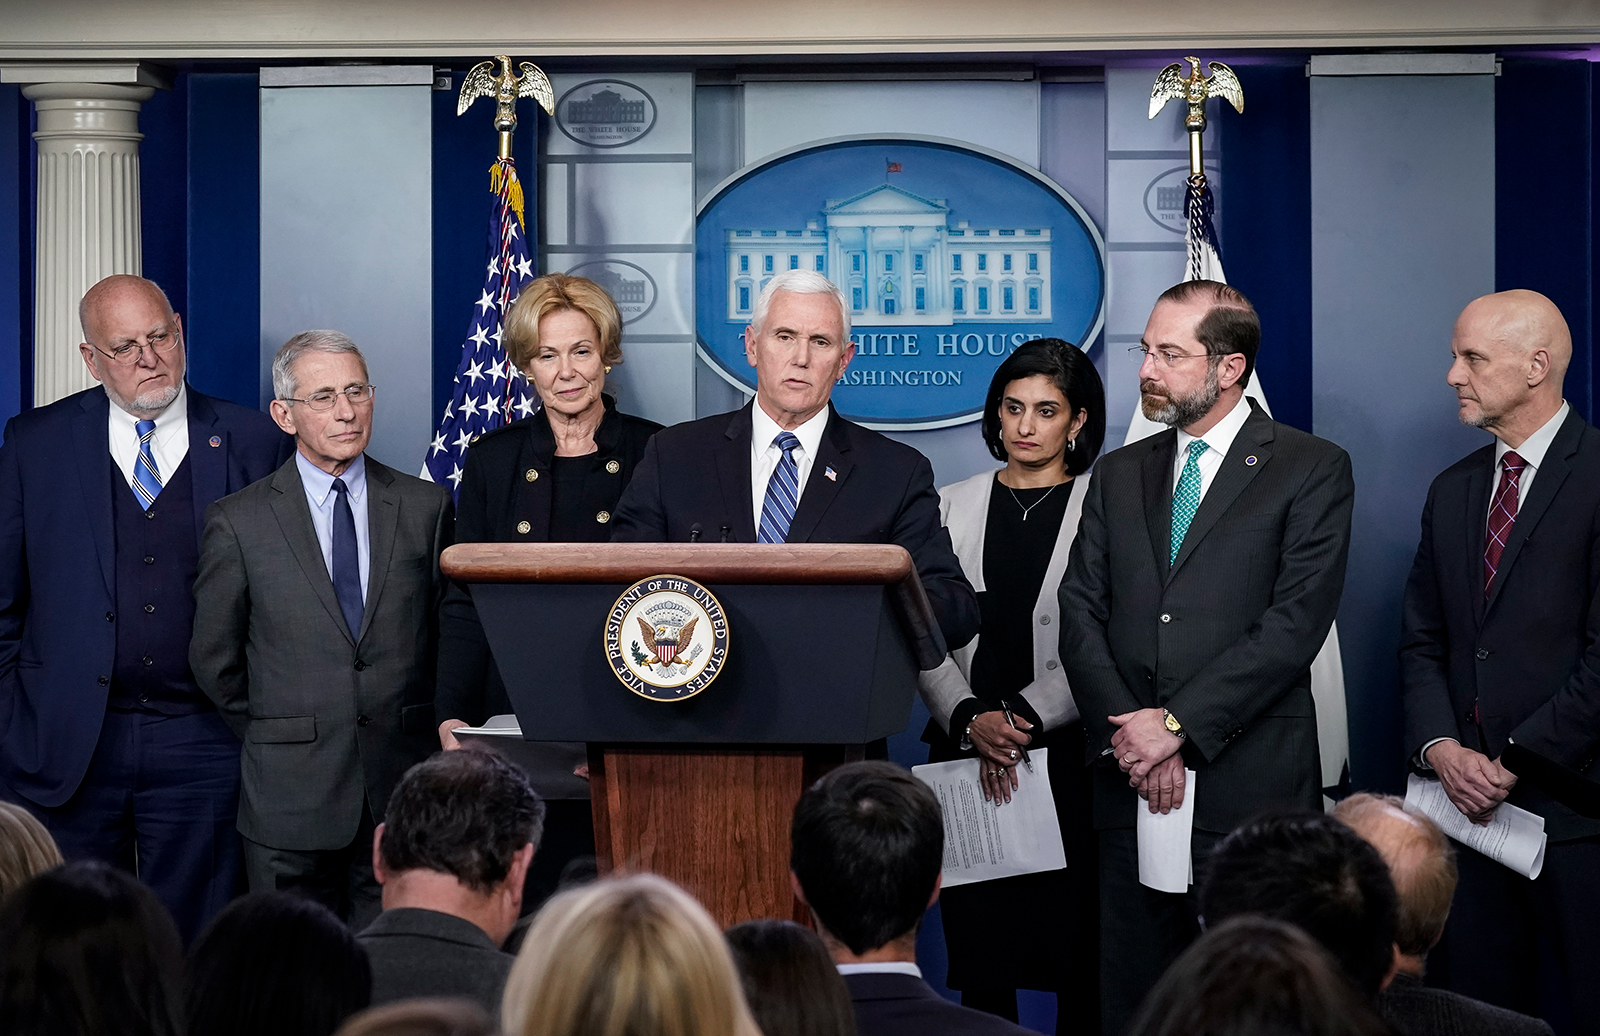 Vice President Mike Pence speaks during a briefing on the administration's coronavirus response in the press briefing room of the White House on March 2, in Washington, DC. Standing with Pence, from left to right, Robert Redfield, Director of the Centers for Disease Control and Prevention, Dr. Anthony Fauci, director of the National Institute of Allergy and Infectious Diseases, Debbie Birx, White House Corona Virus Response Coordinator, Seema Verma, administrator of the Centers for Medicare and Medicaid Services, Alex Azar, Secretary of Health and Human Services, and Stephen Hahn, commissioner of food and drugs at the U.S. Food and Drug Administration (FDA). 